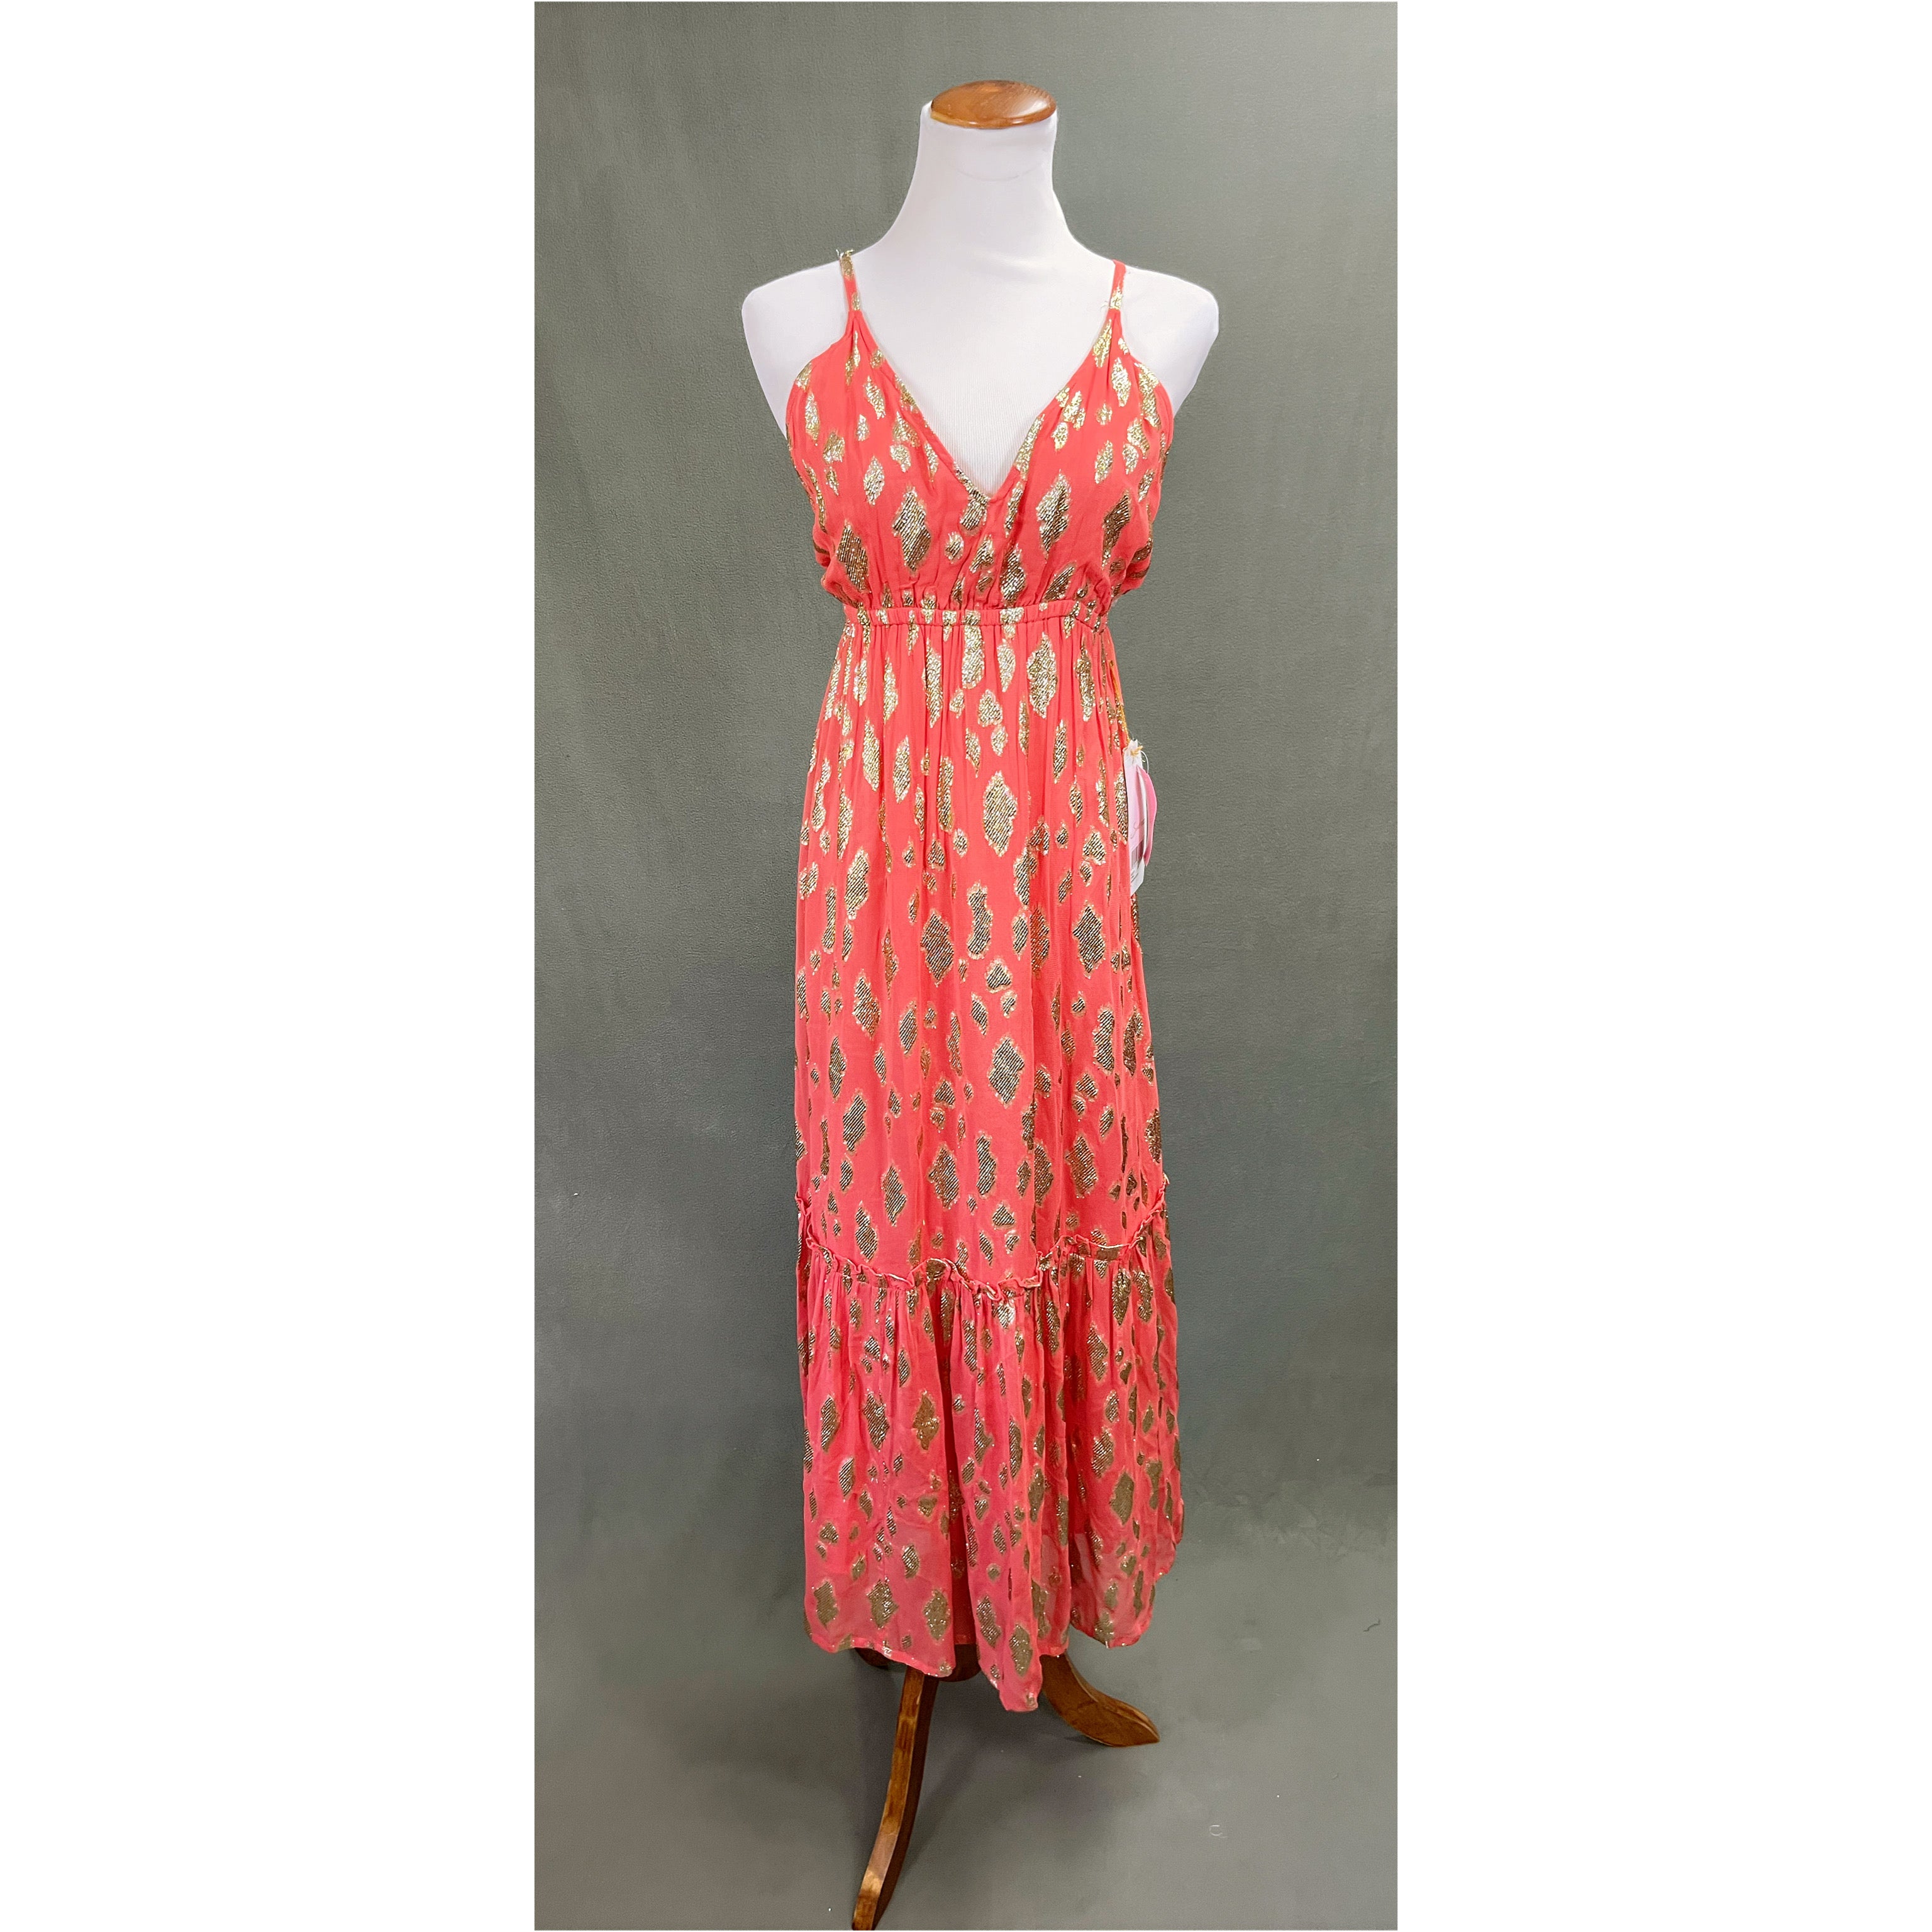 Sundress coral and gold Cirka dress, size S, NEW WITH TAGS!